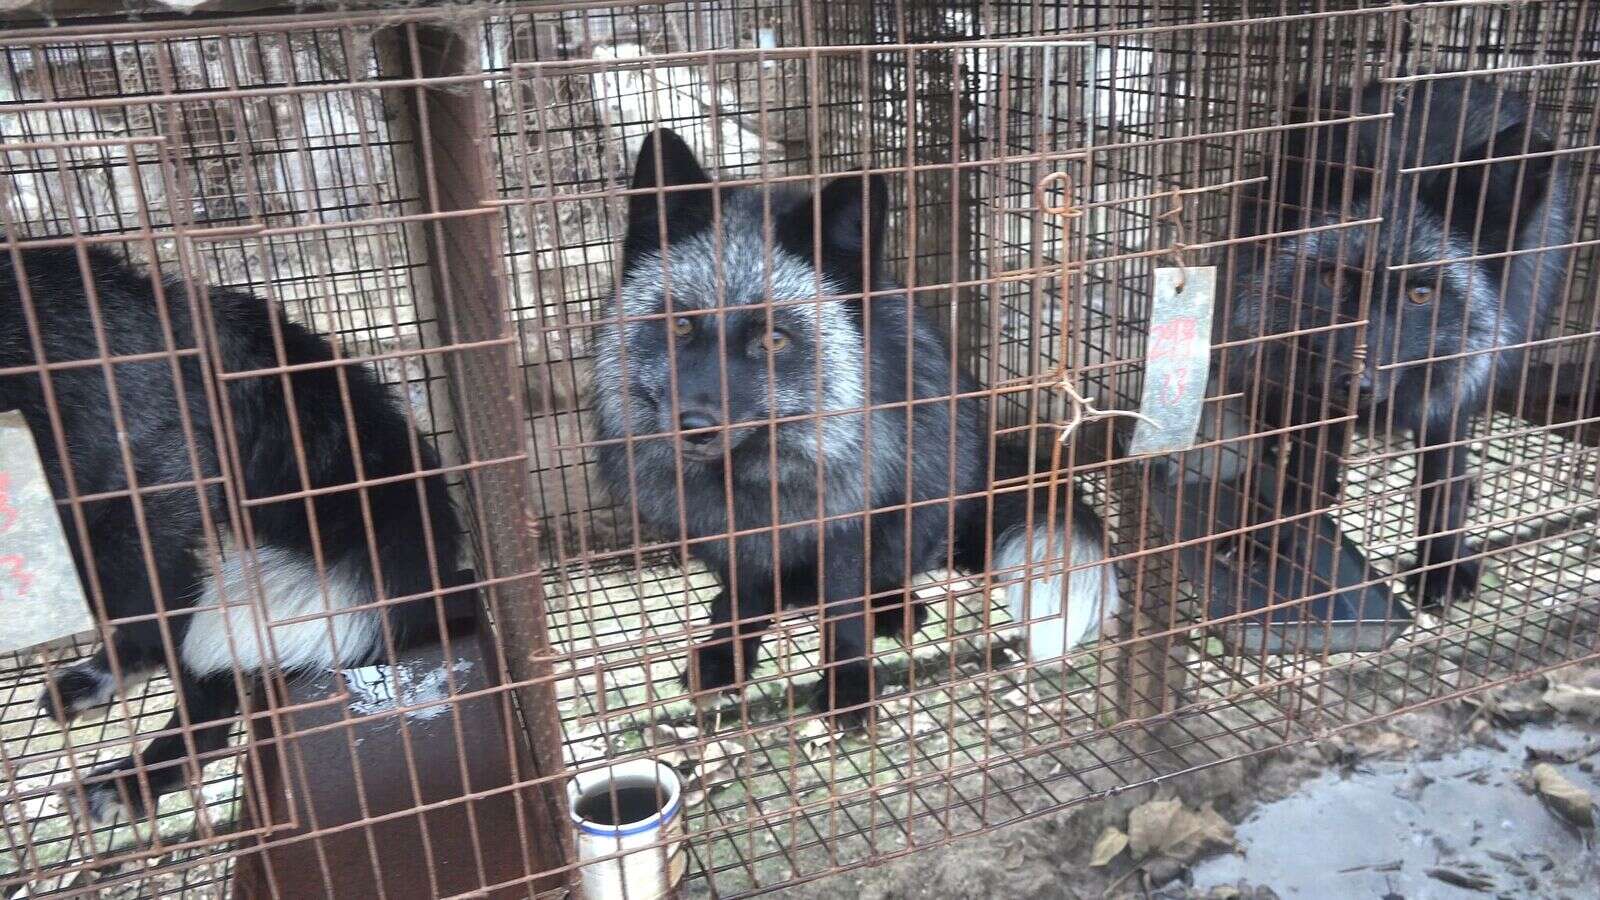 Animals in cages at fur farm